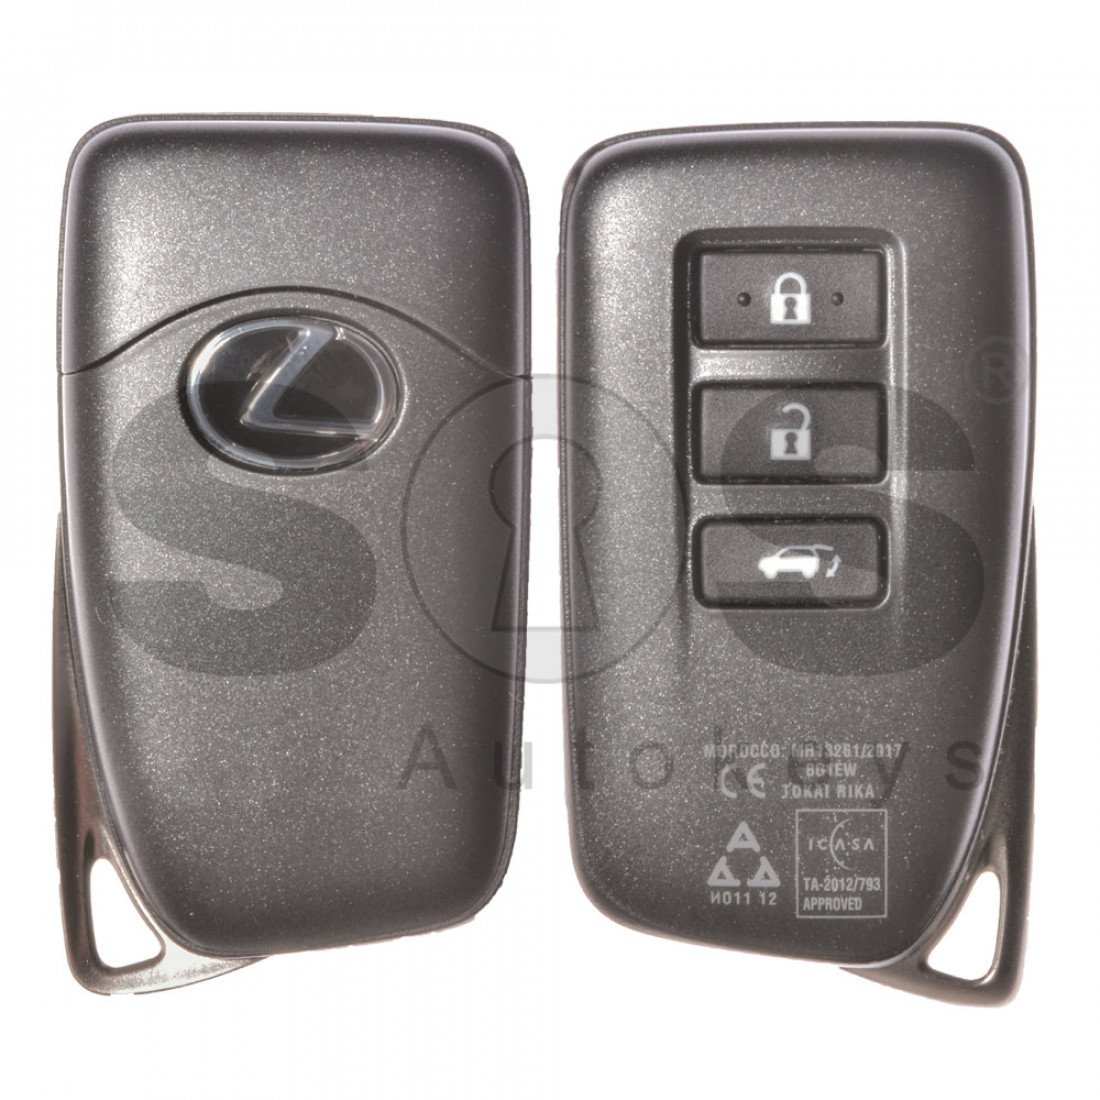 ORIGINAL Smart Key for Lexus Buttons:3 / Frequency: 433MHz ...